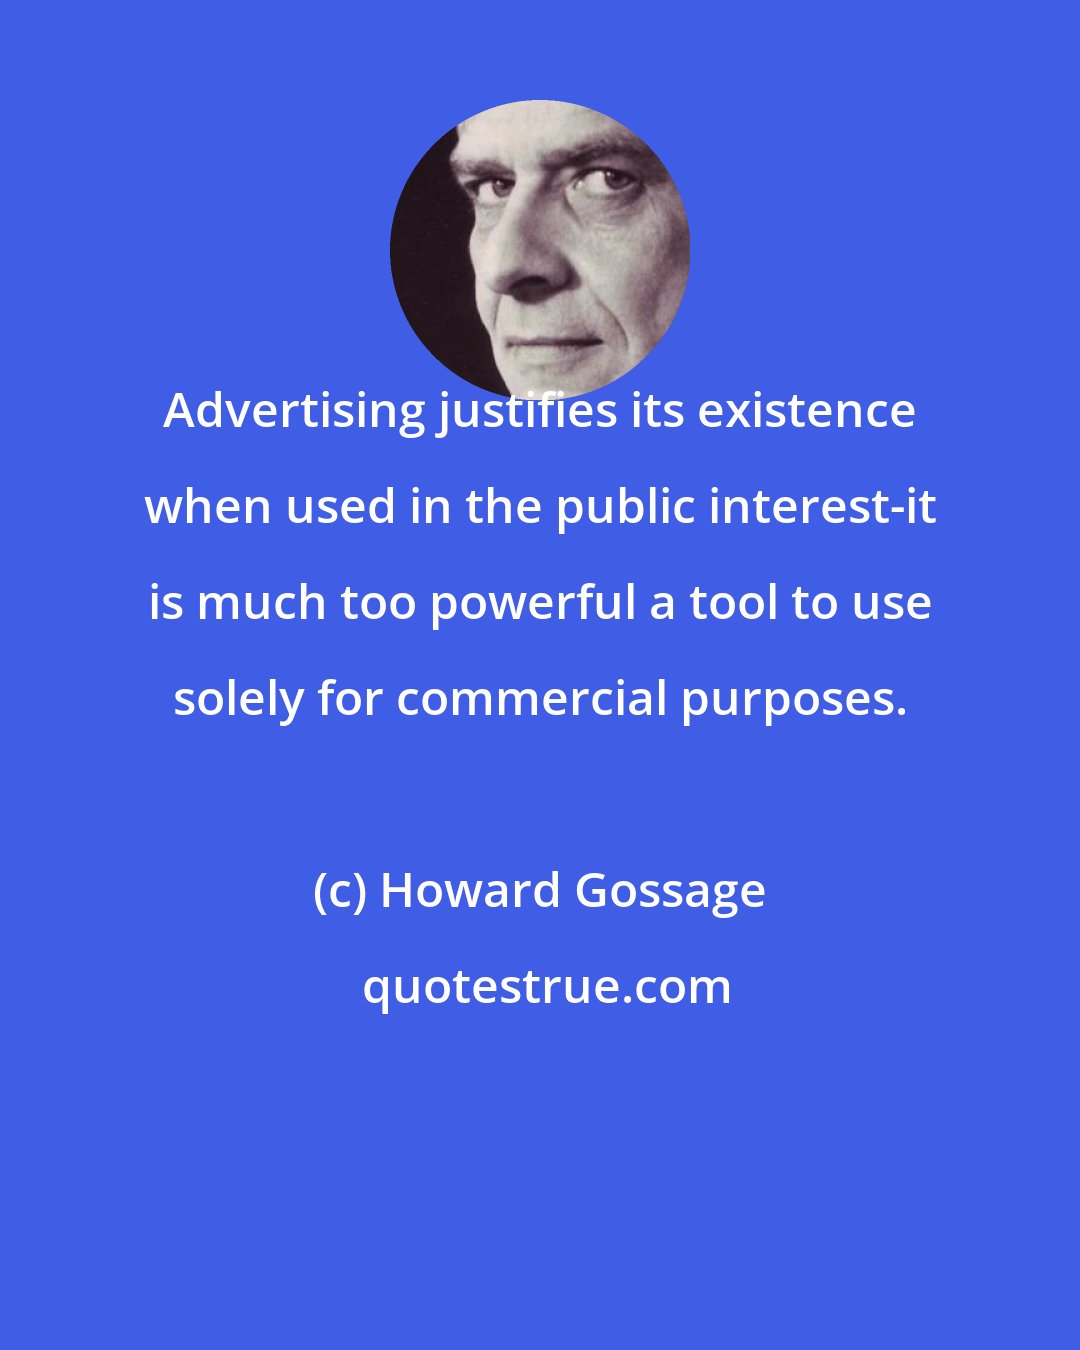 Howard Gossage: Advertising justifies its existence when used in the public interest-it is much too powerful a tool to use solely for commercial purposes.